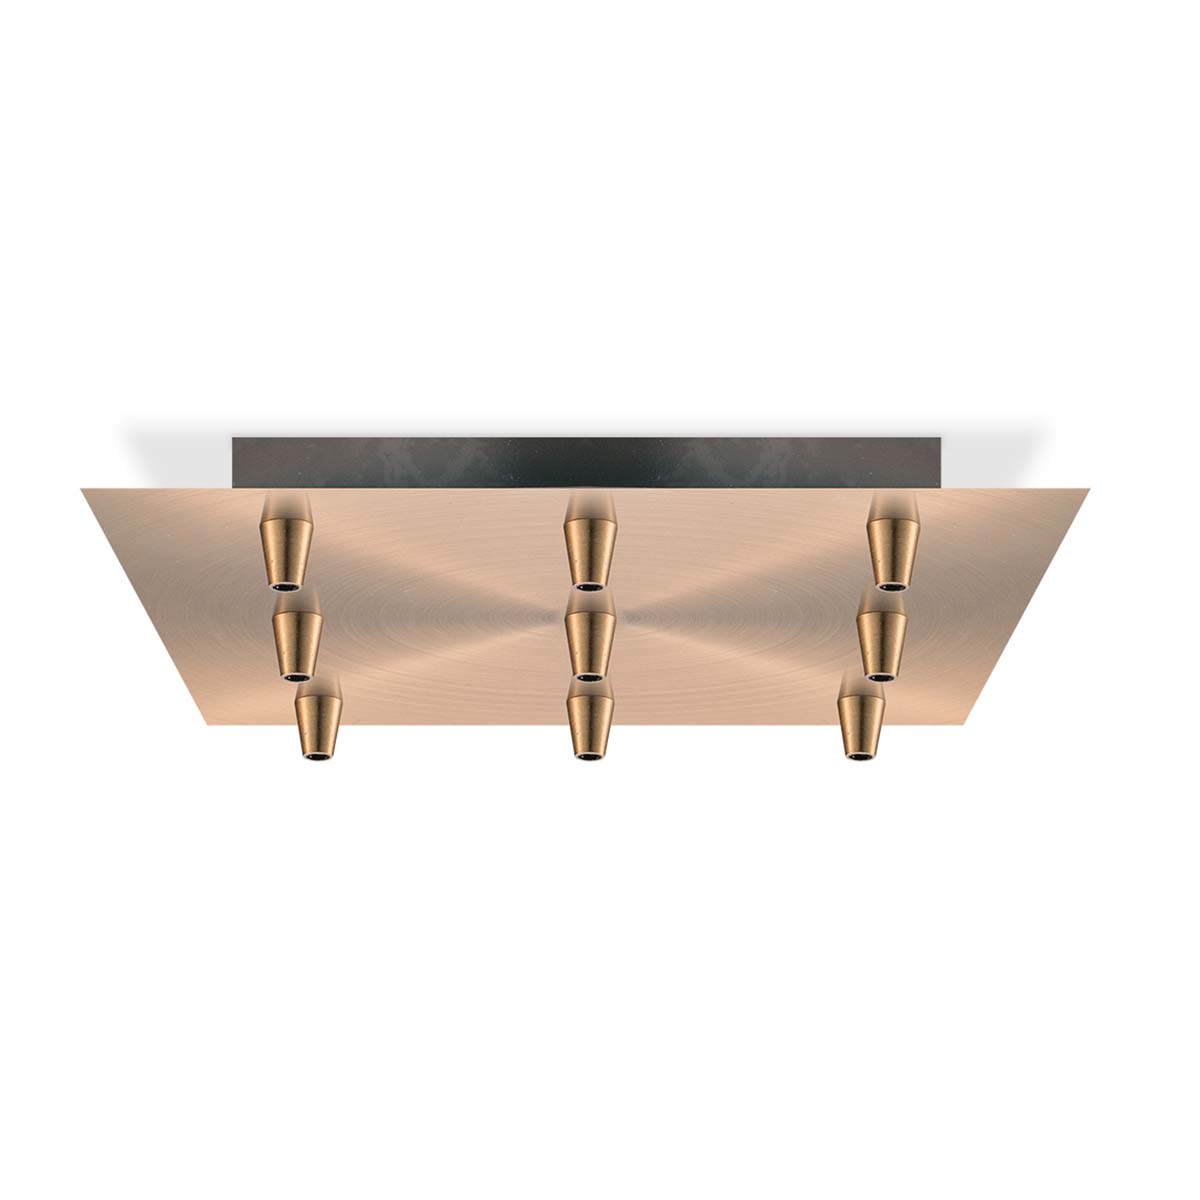 Tangla lighting - TLCP017-09CP - Metal 9 Lights square canopy large - adjustable copper